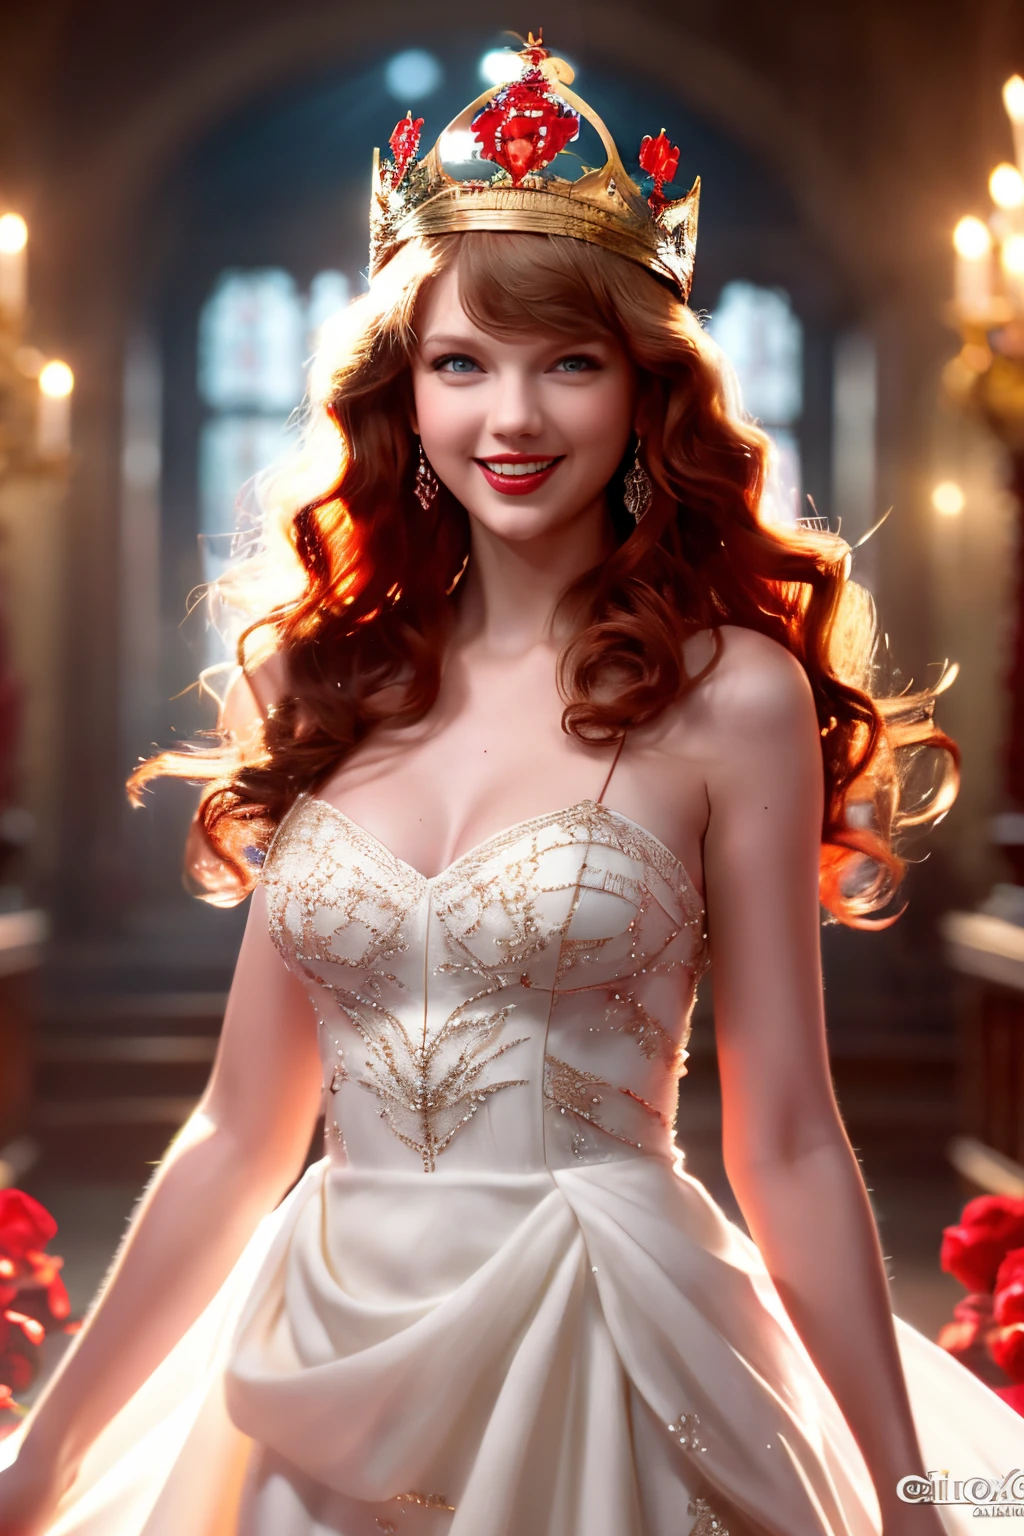 Best Shots，high-definition picture,,beautiful red haired woman (Wearing a crown), (Houdini, VFX, with a beautifull smile,Beautiful, 4K ),   white gown and red satin dress，